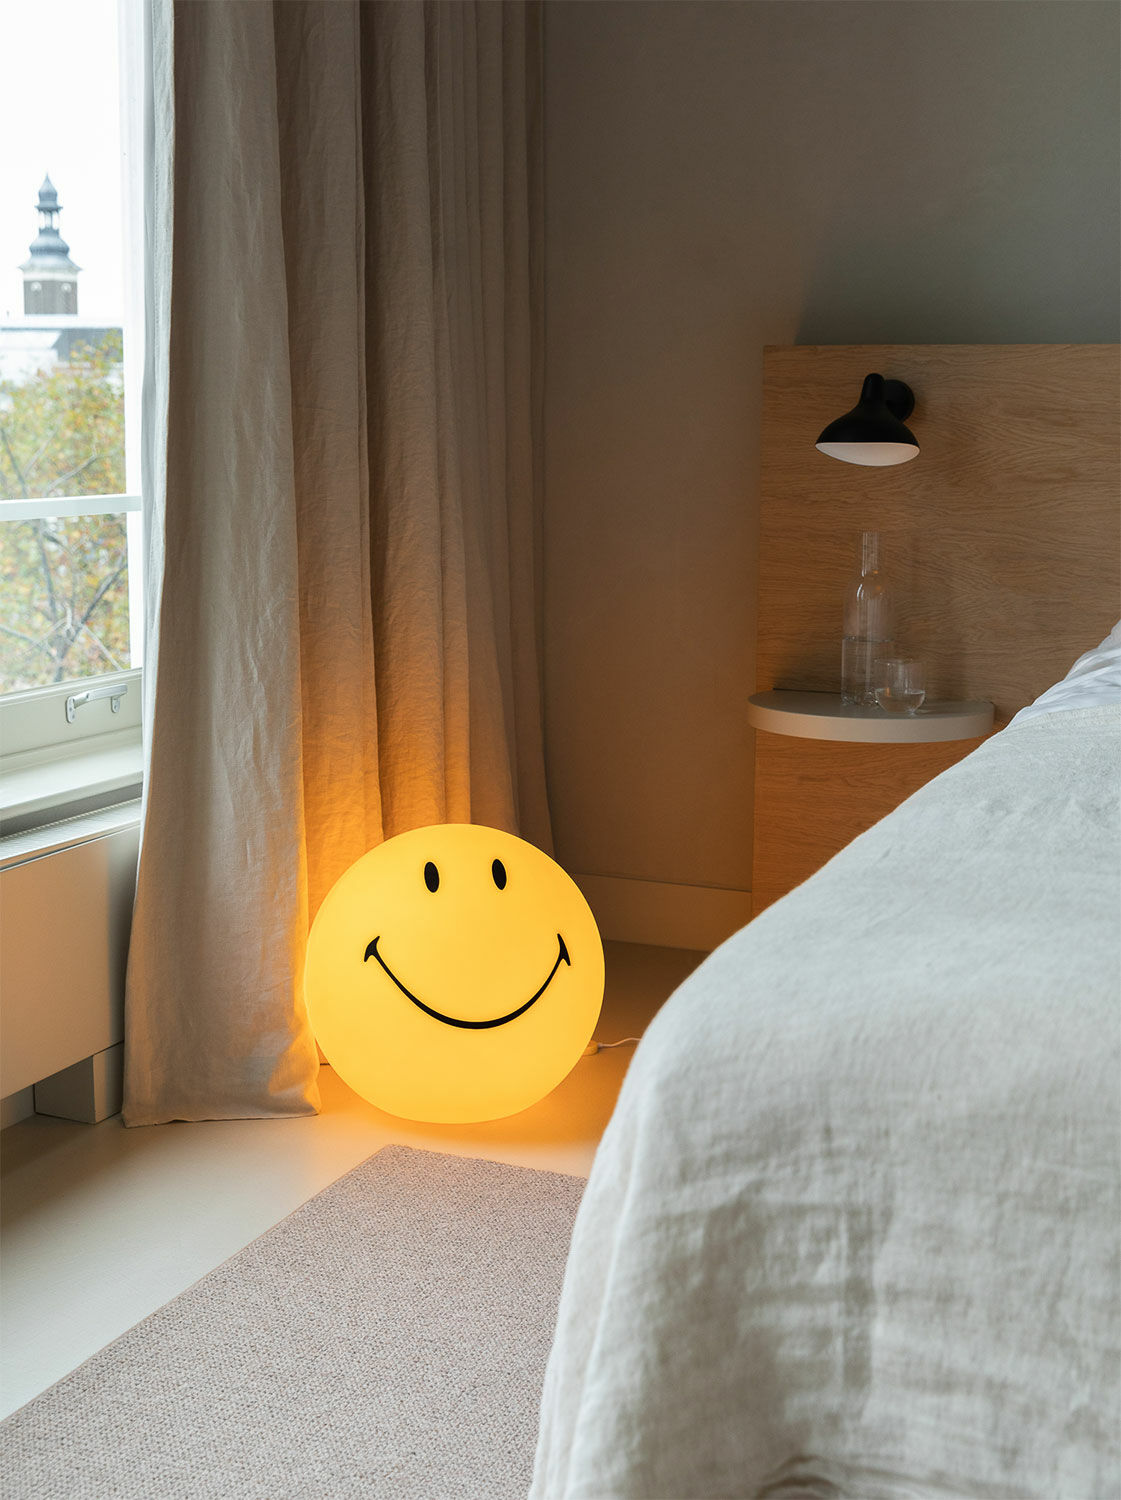 LED lamp "Smiley®", large version, dimmable incl. night mode by Mr. Maria